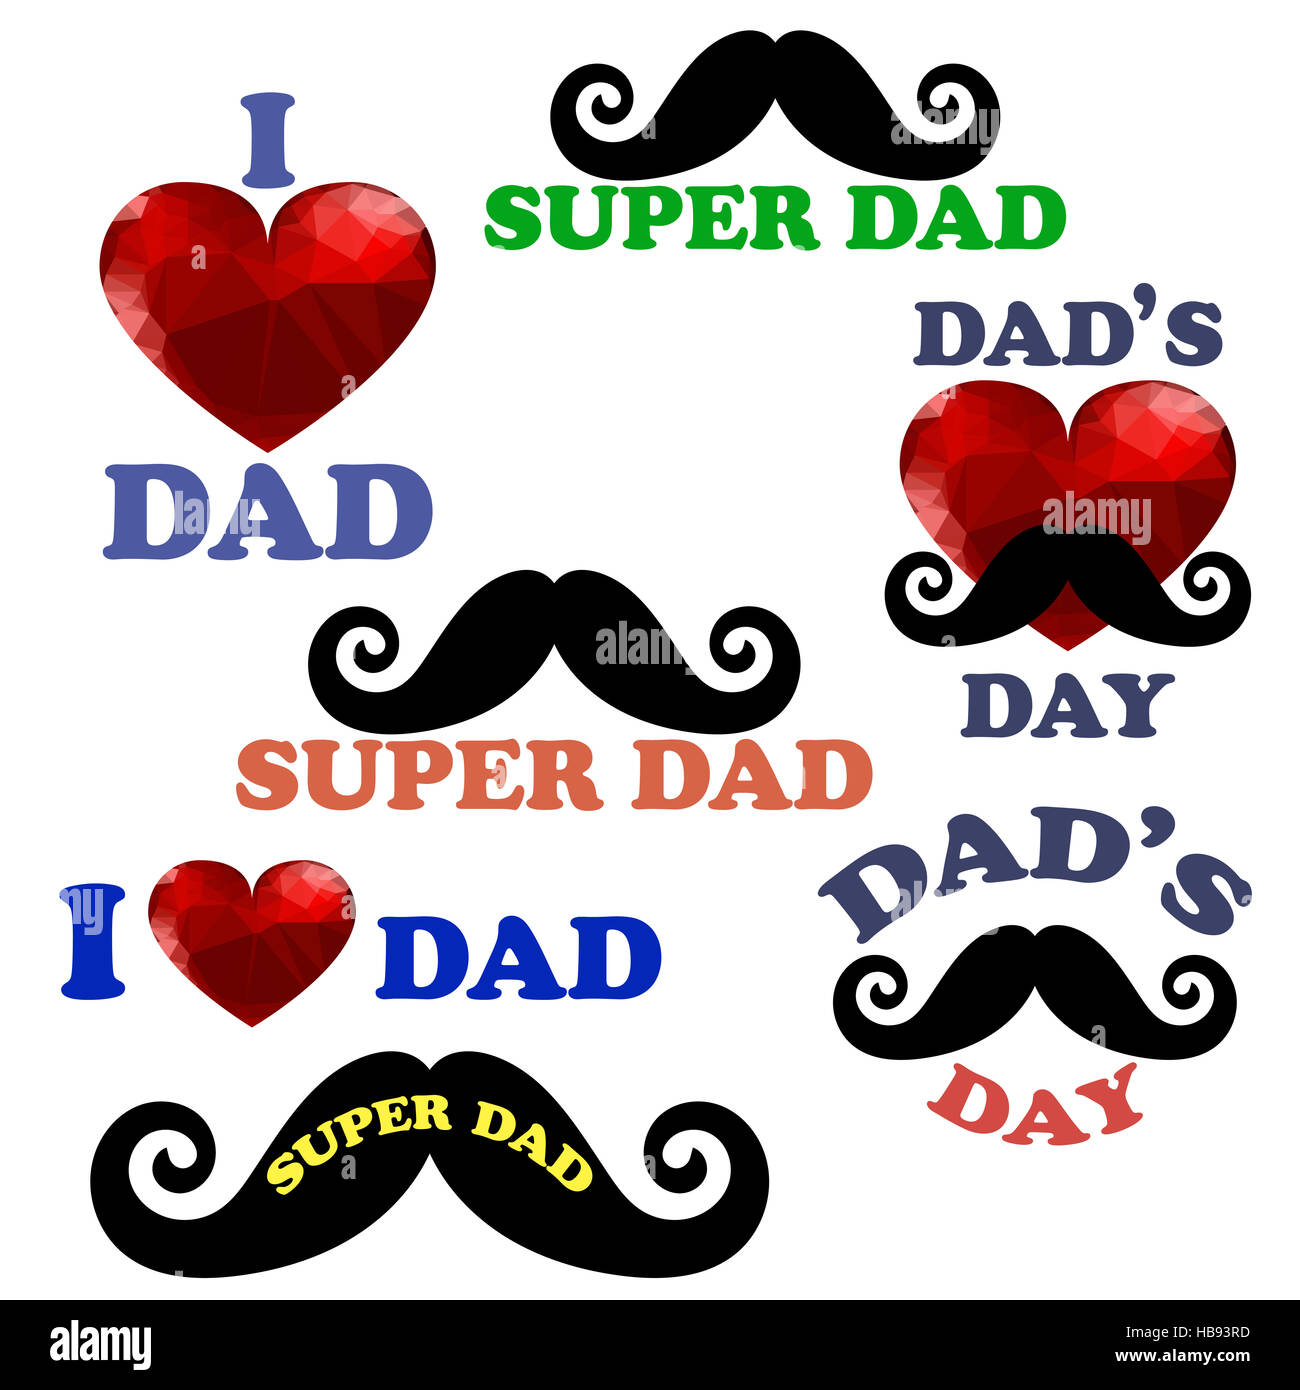 https://c8.alamy.com/comp/HB93RD/happy-fathers-day-design-collection-HB93RD.jpg